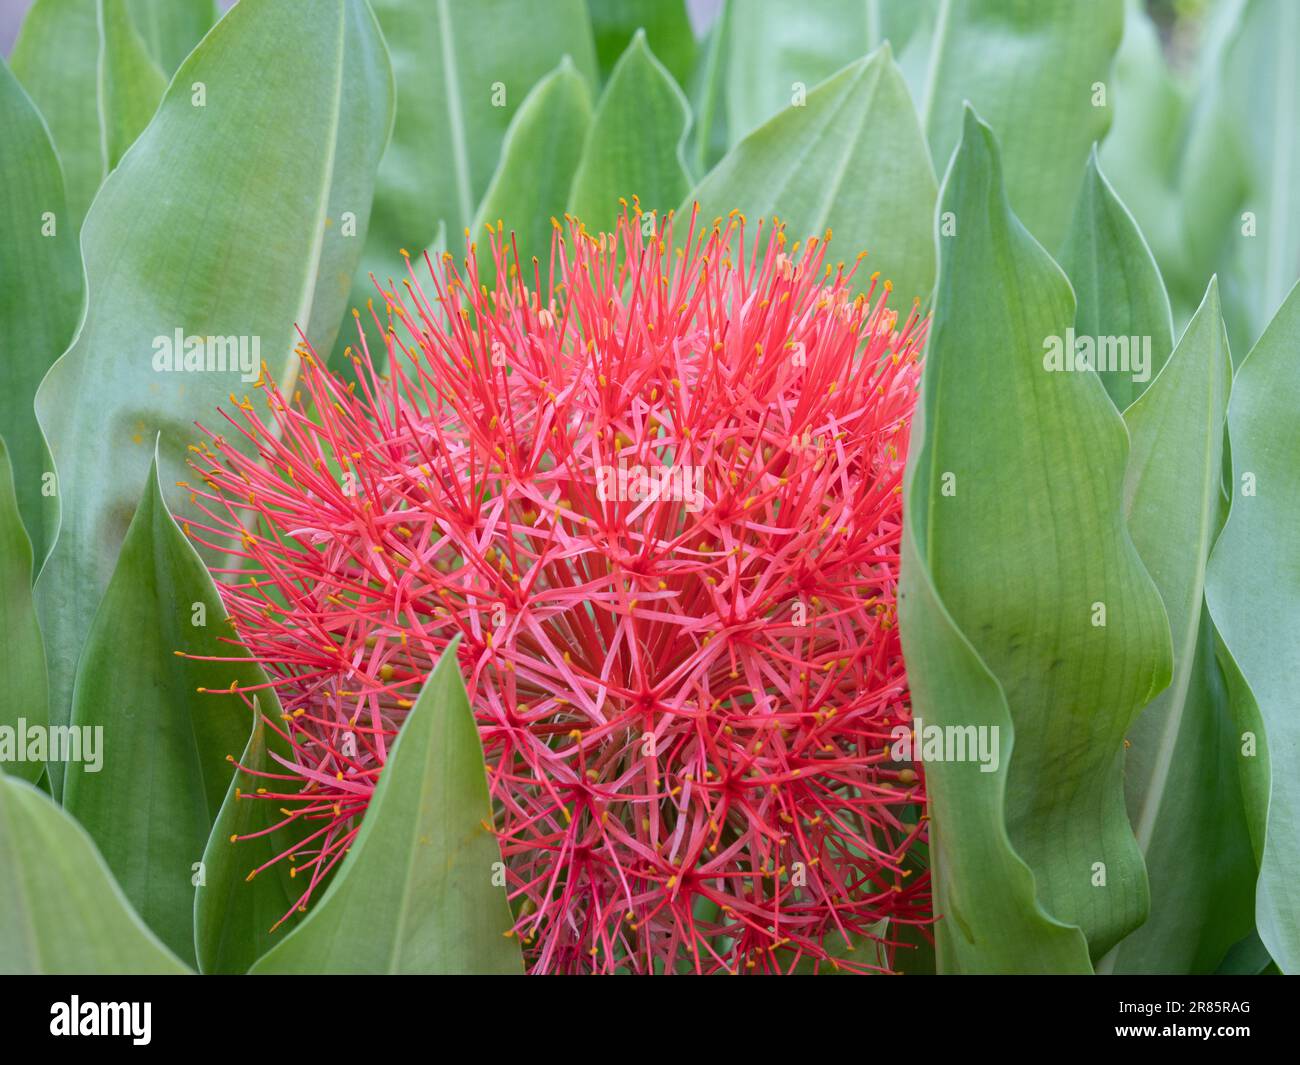 The unusual flower head of the blood lily, Scadoxus multiflorus, nestled among its lush green leaves. Stock Photo